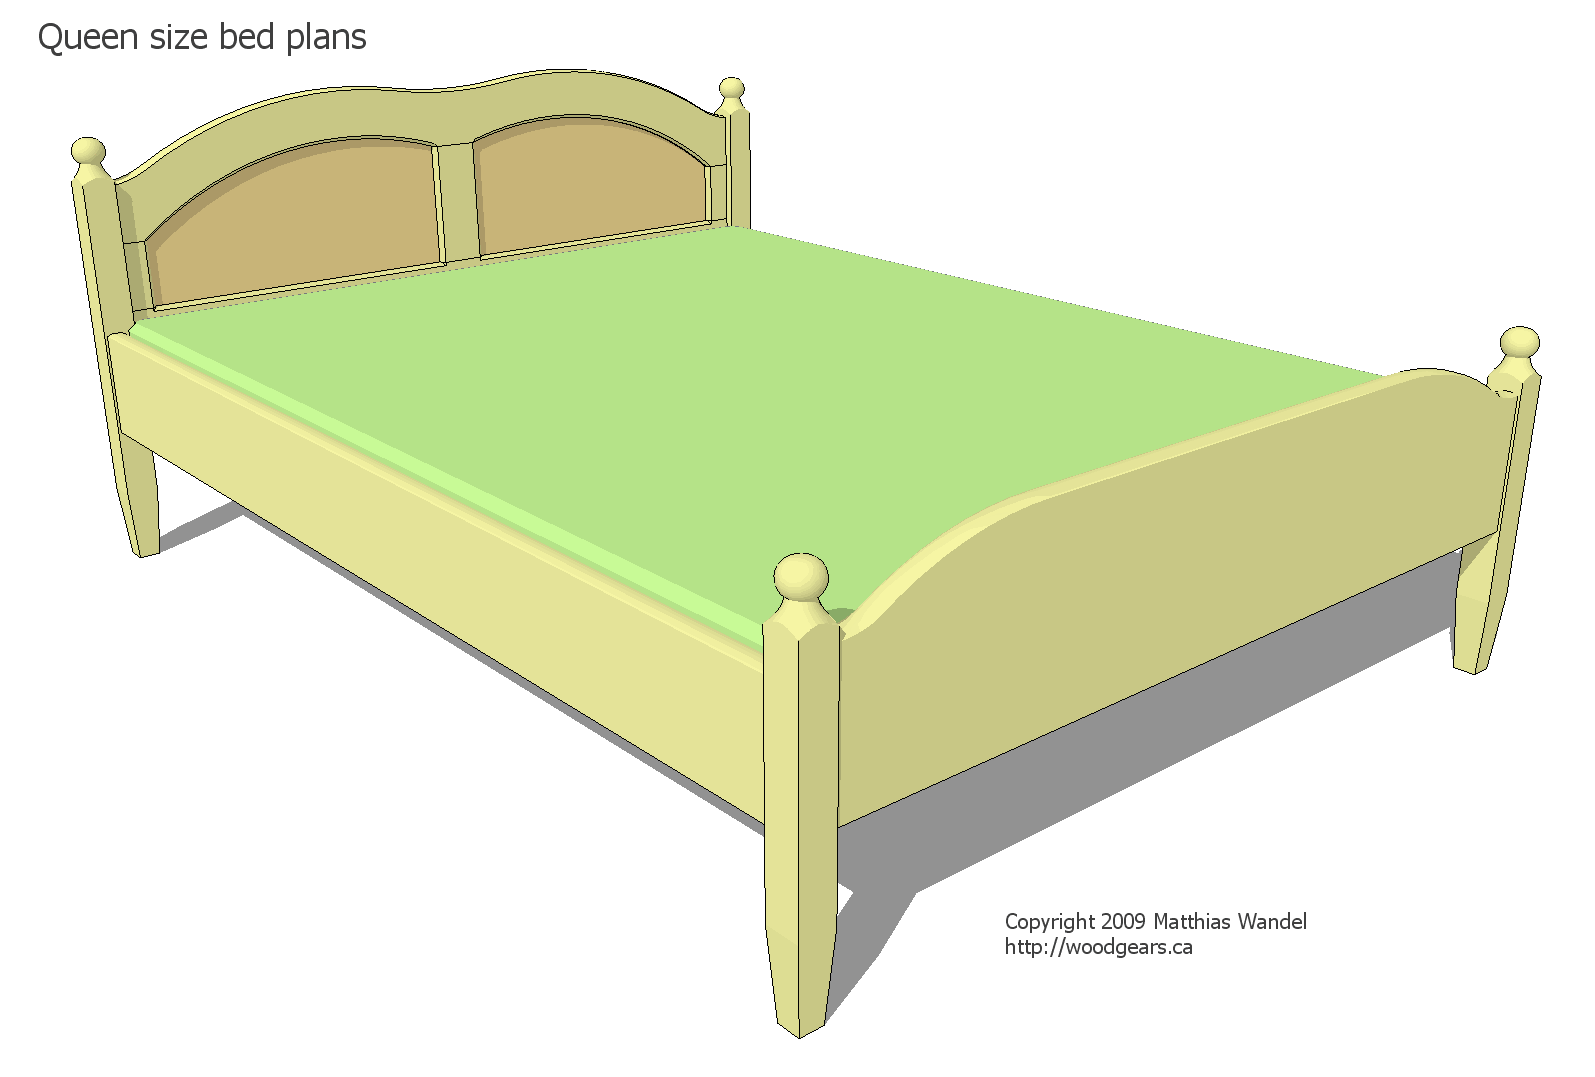 plans plans for a bed with queen size size mattress 60 x80 152x203 cm ...